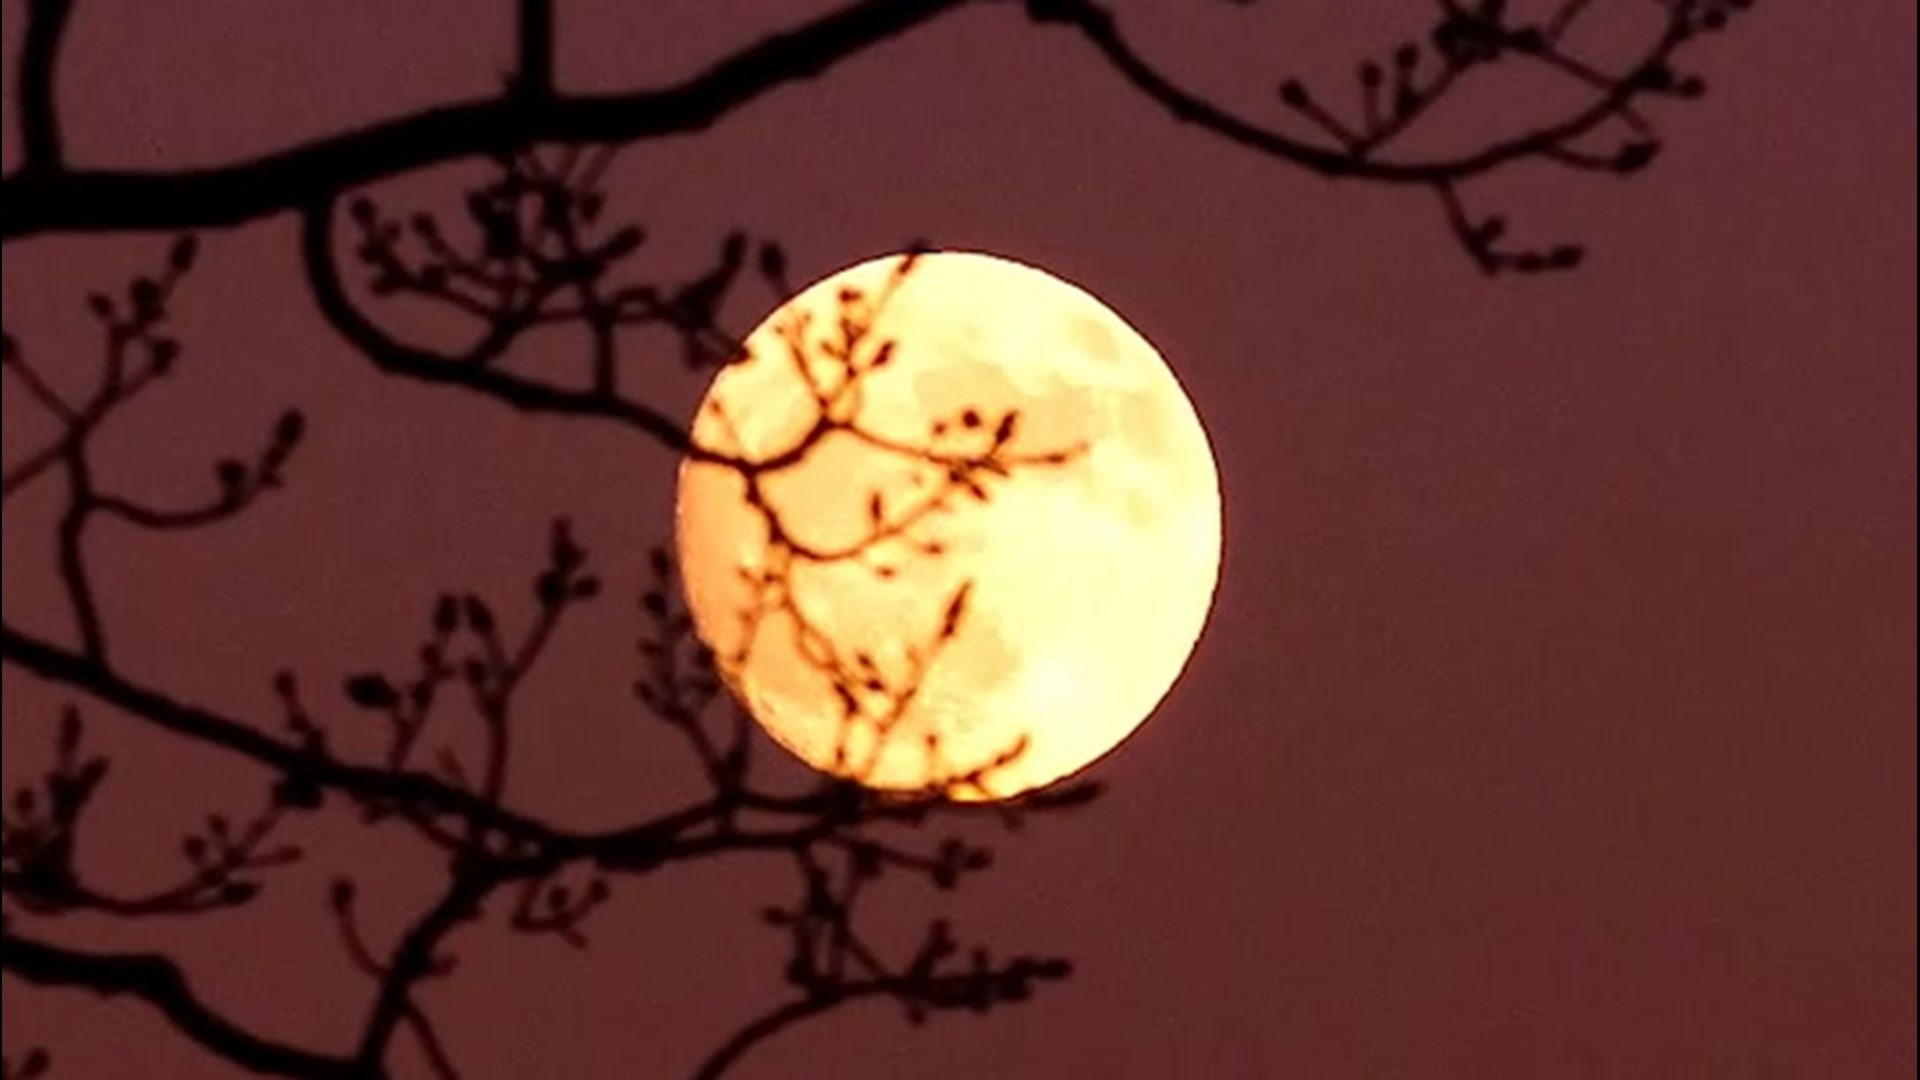 Looking for something interesting to kick off your weekend?  Head outside to your backyard and be greeted by a bright full moon shining all night.